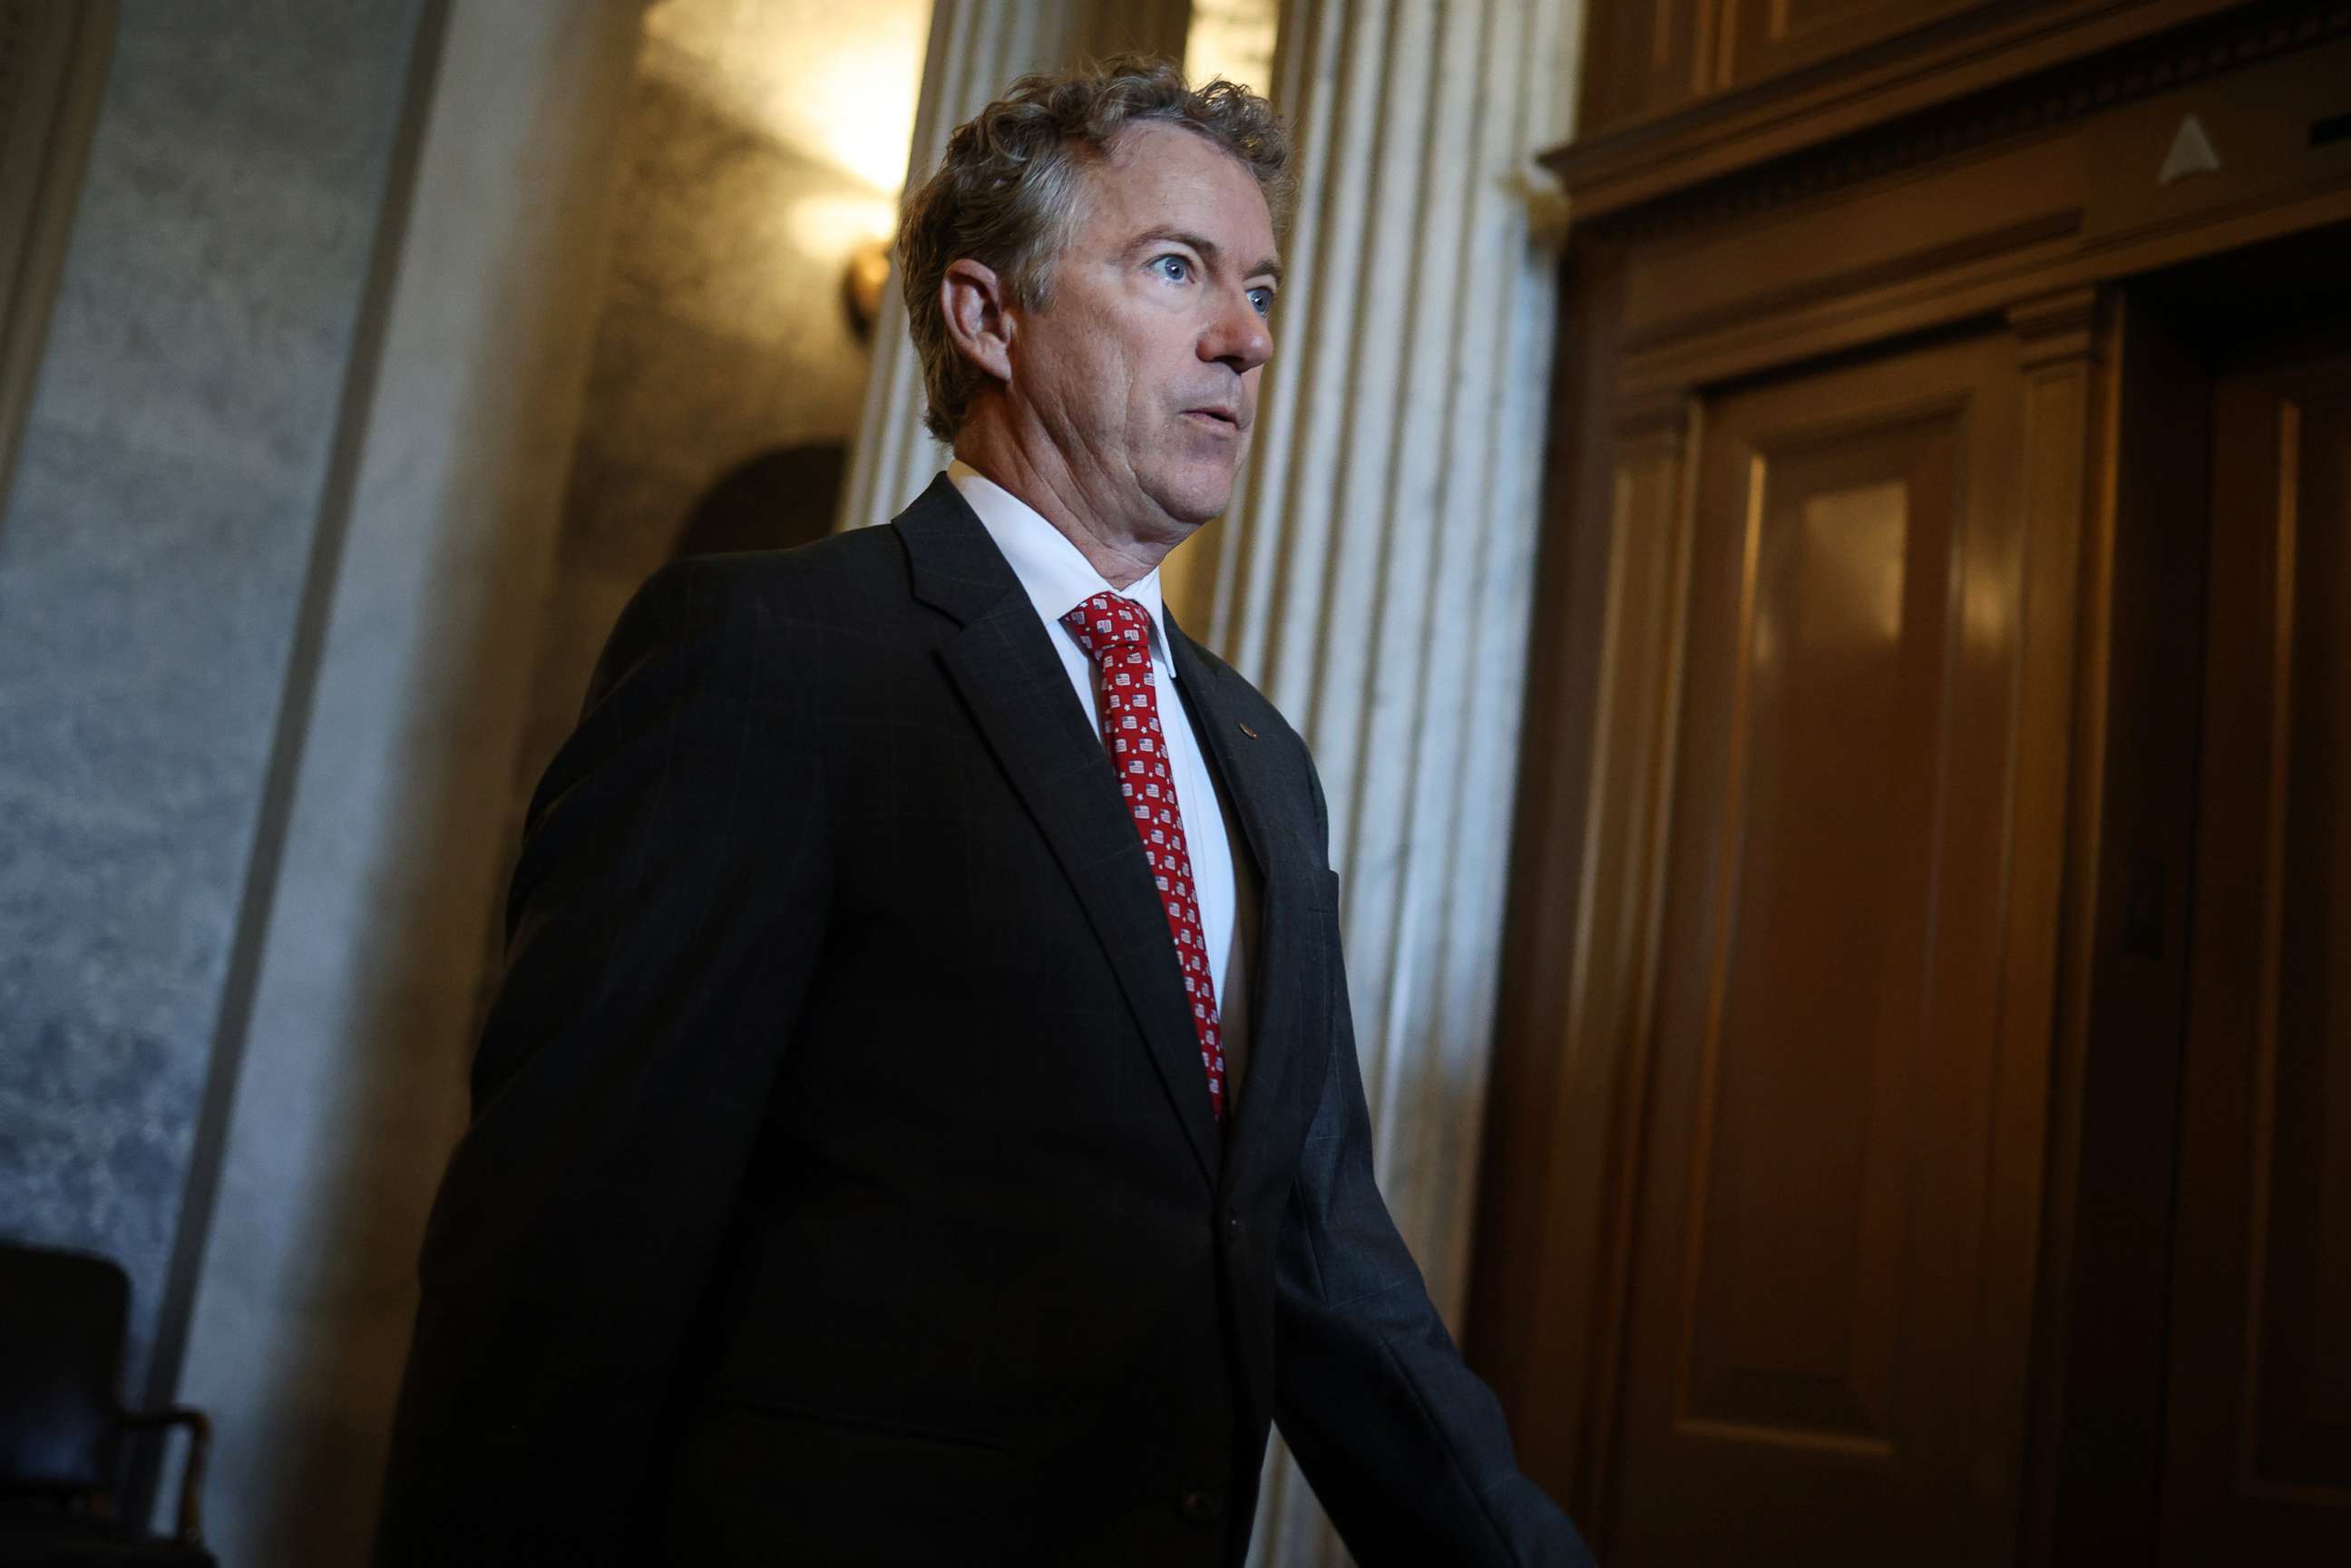 PHOTO: Sen. Rand Paul departs from the Senate Chambers in the U.S. Capitol on July 21, 2021, in Washington, D.C.